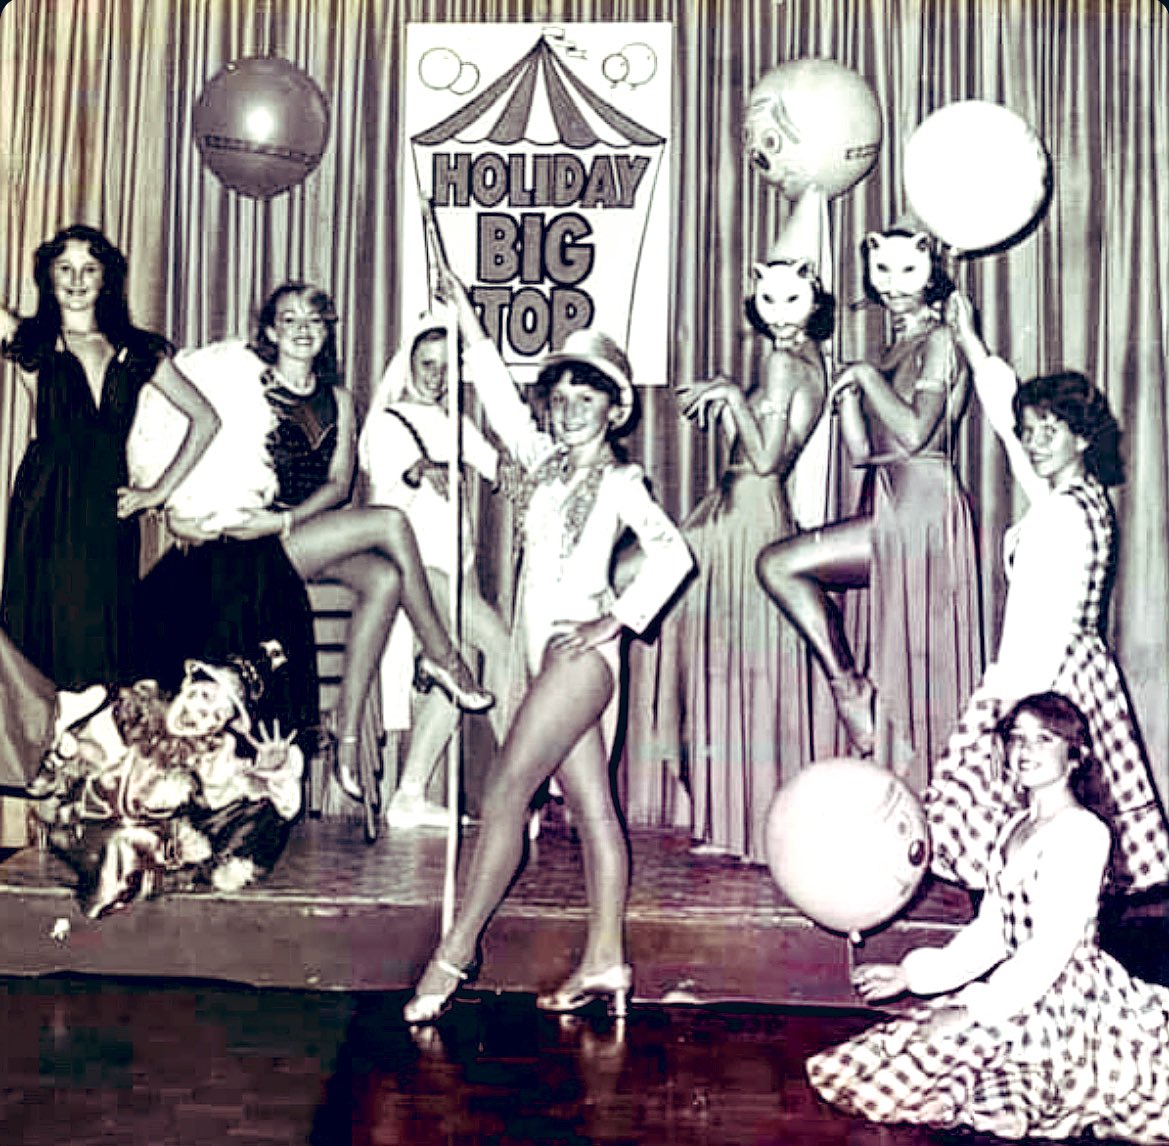 Timeline cleanse: once a showgirl. 😊 (Pretty sure it was a school holiday ‘show’ on the Raindrop Fountain, Roselands!) - you’ll get it @michaelidato @andrewmercado @newmrpford @AngelaBishop 💃 My solo song & dance? Multi-eisteddfod- winning ‘No business like show business’ 😂